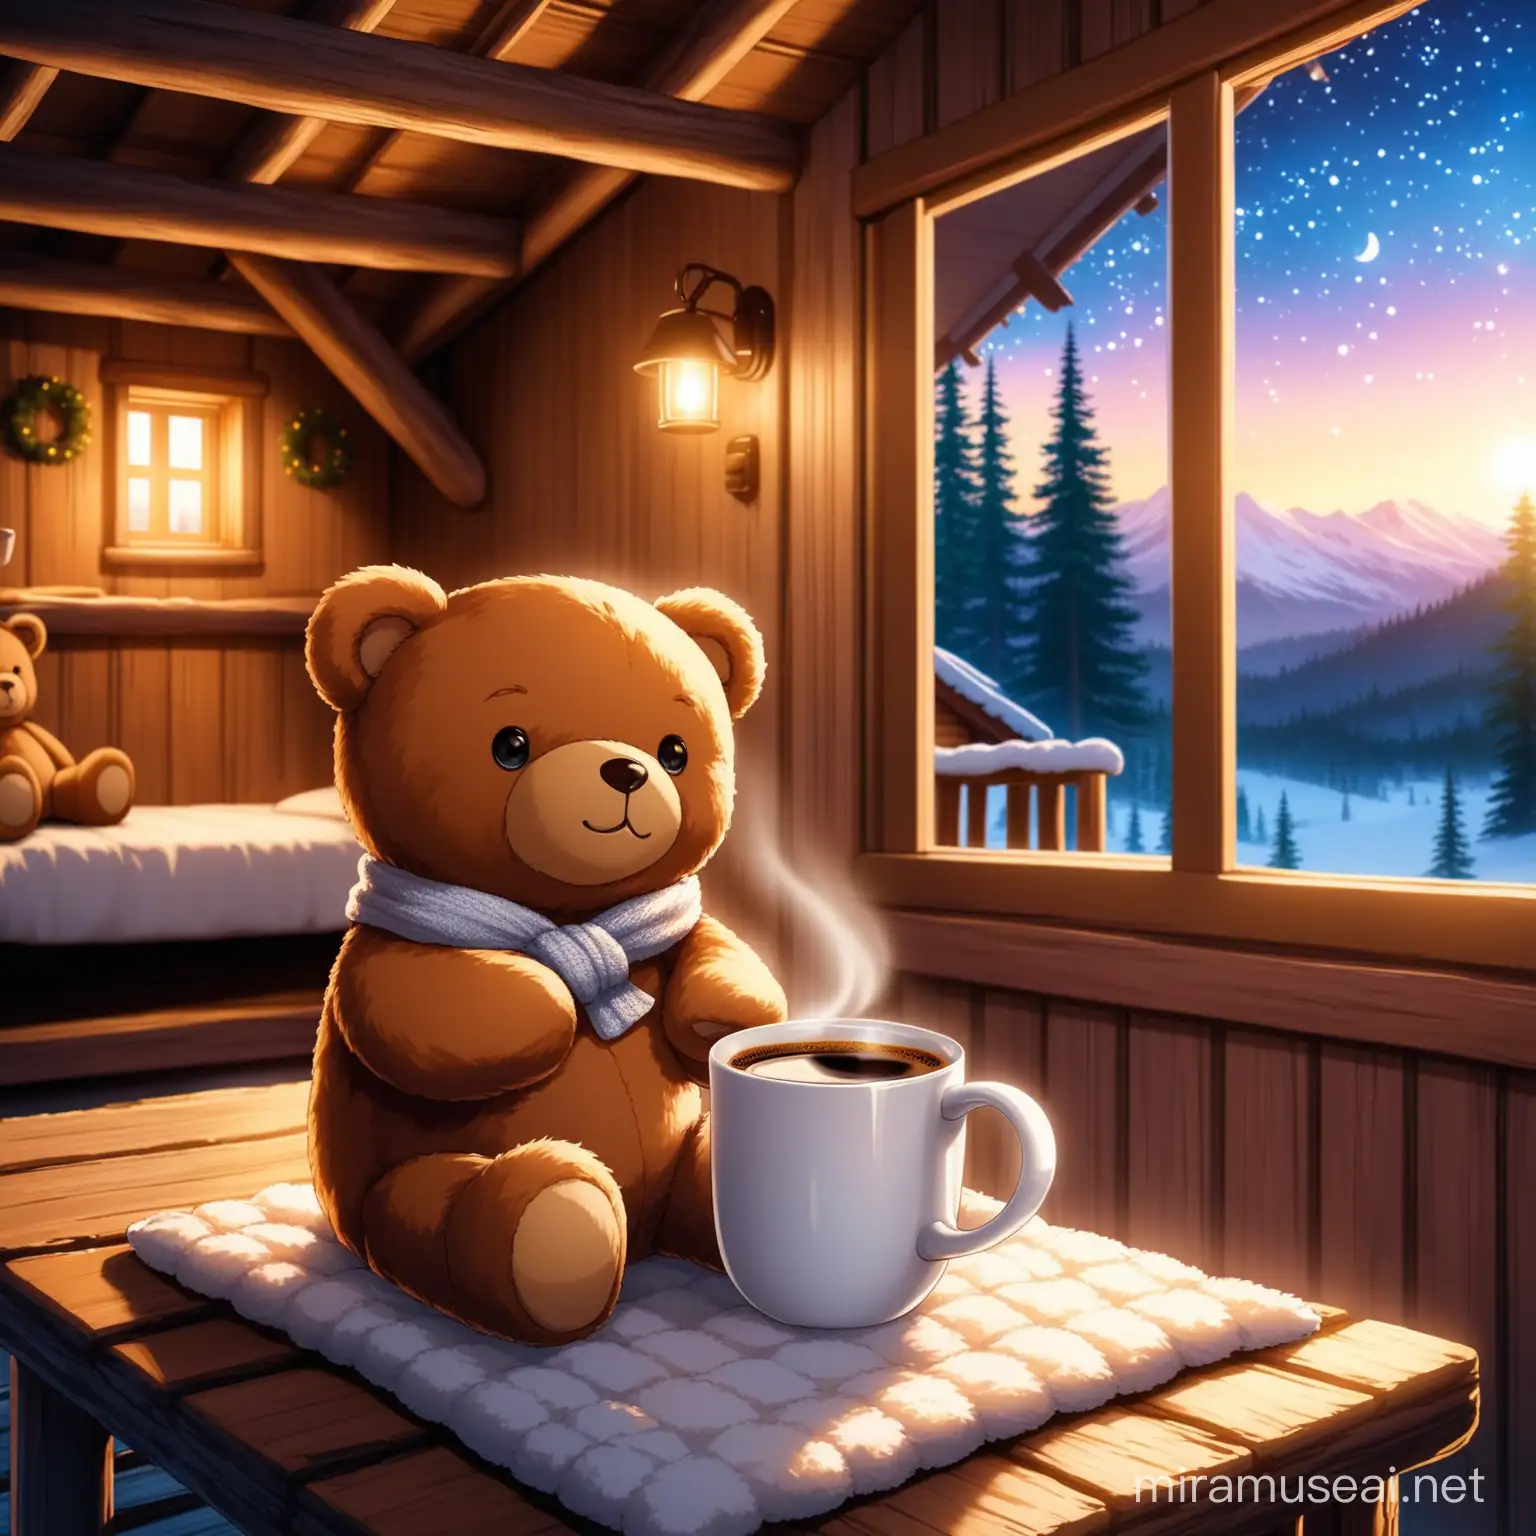 teddy bear drinking cup of coffee in white mug in a cozy enchanted cabin